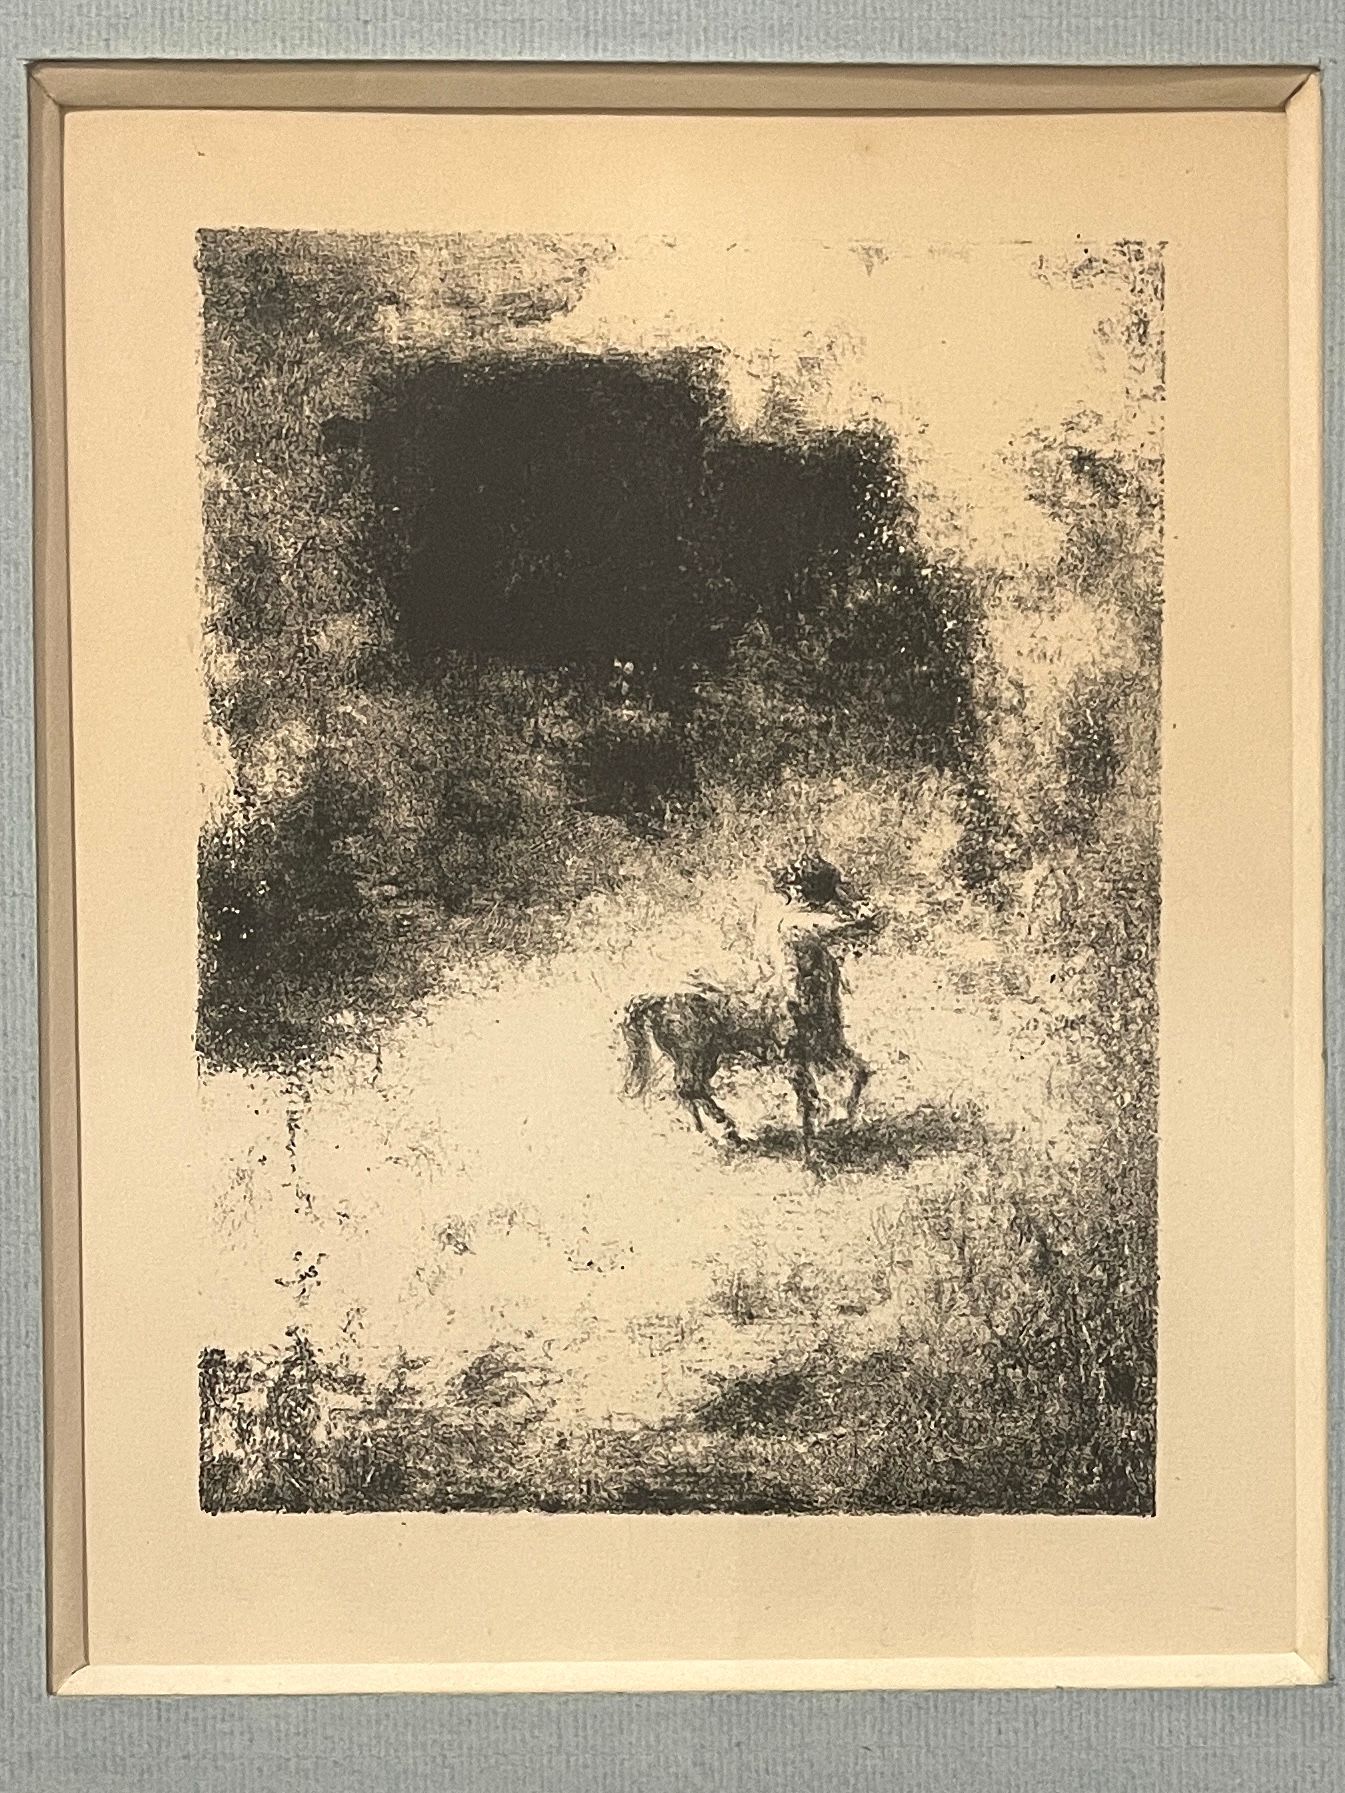 Null XAVIER-KER ROUSSEL (1867-1944)

Small centaur in a clearing in the sun

Abo&hellip;